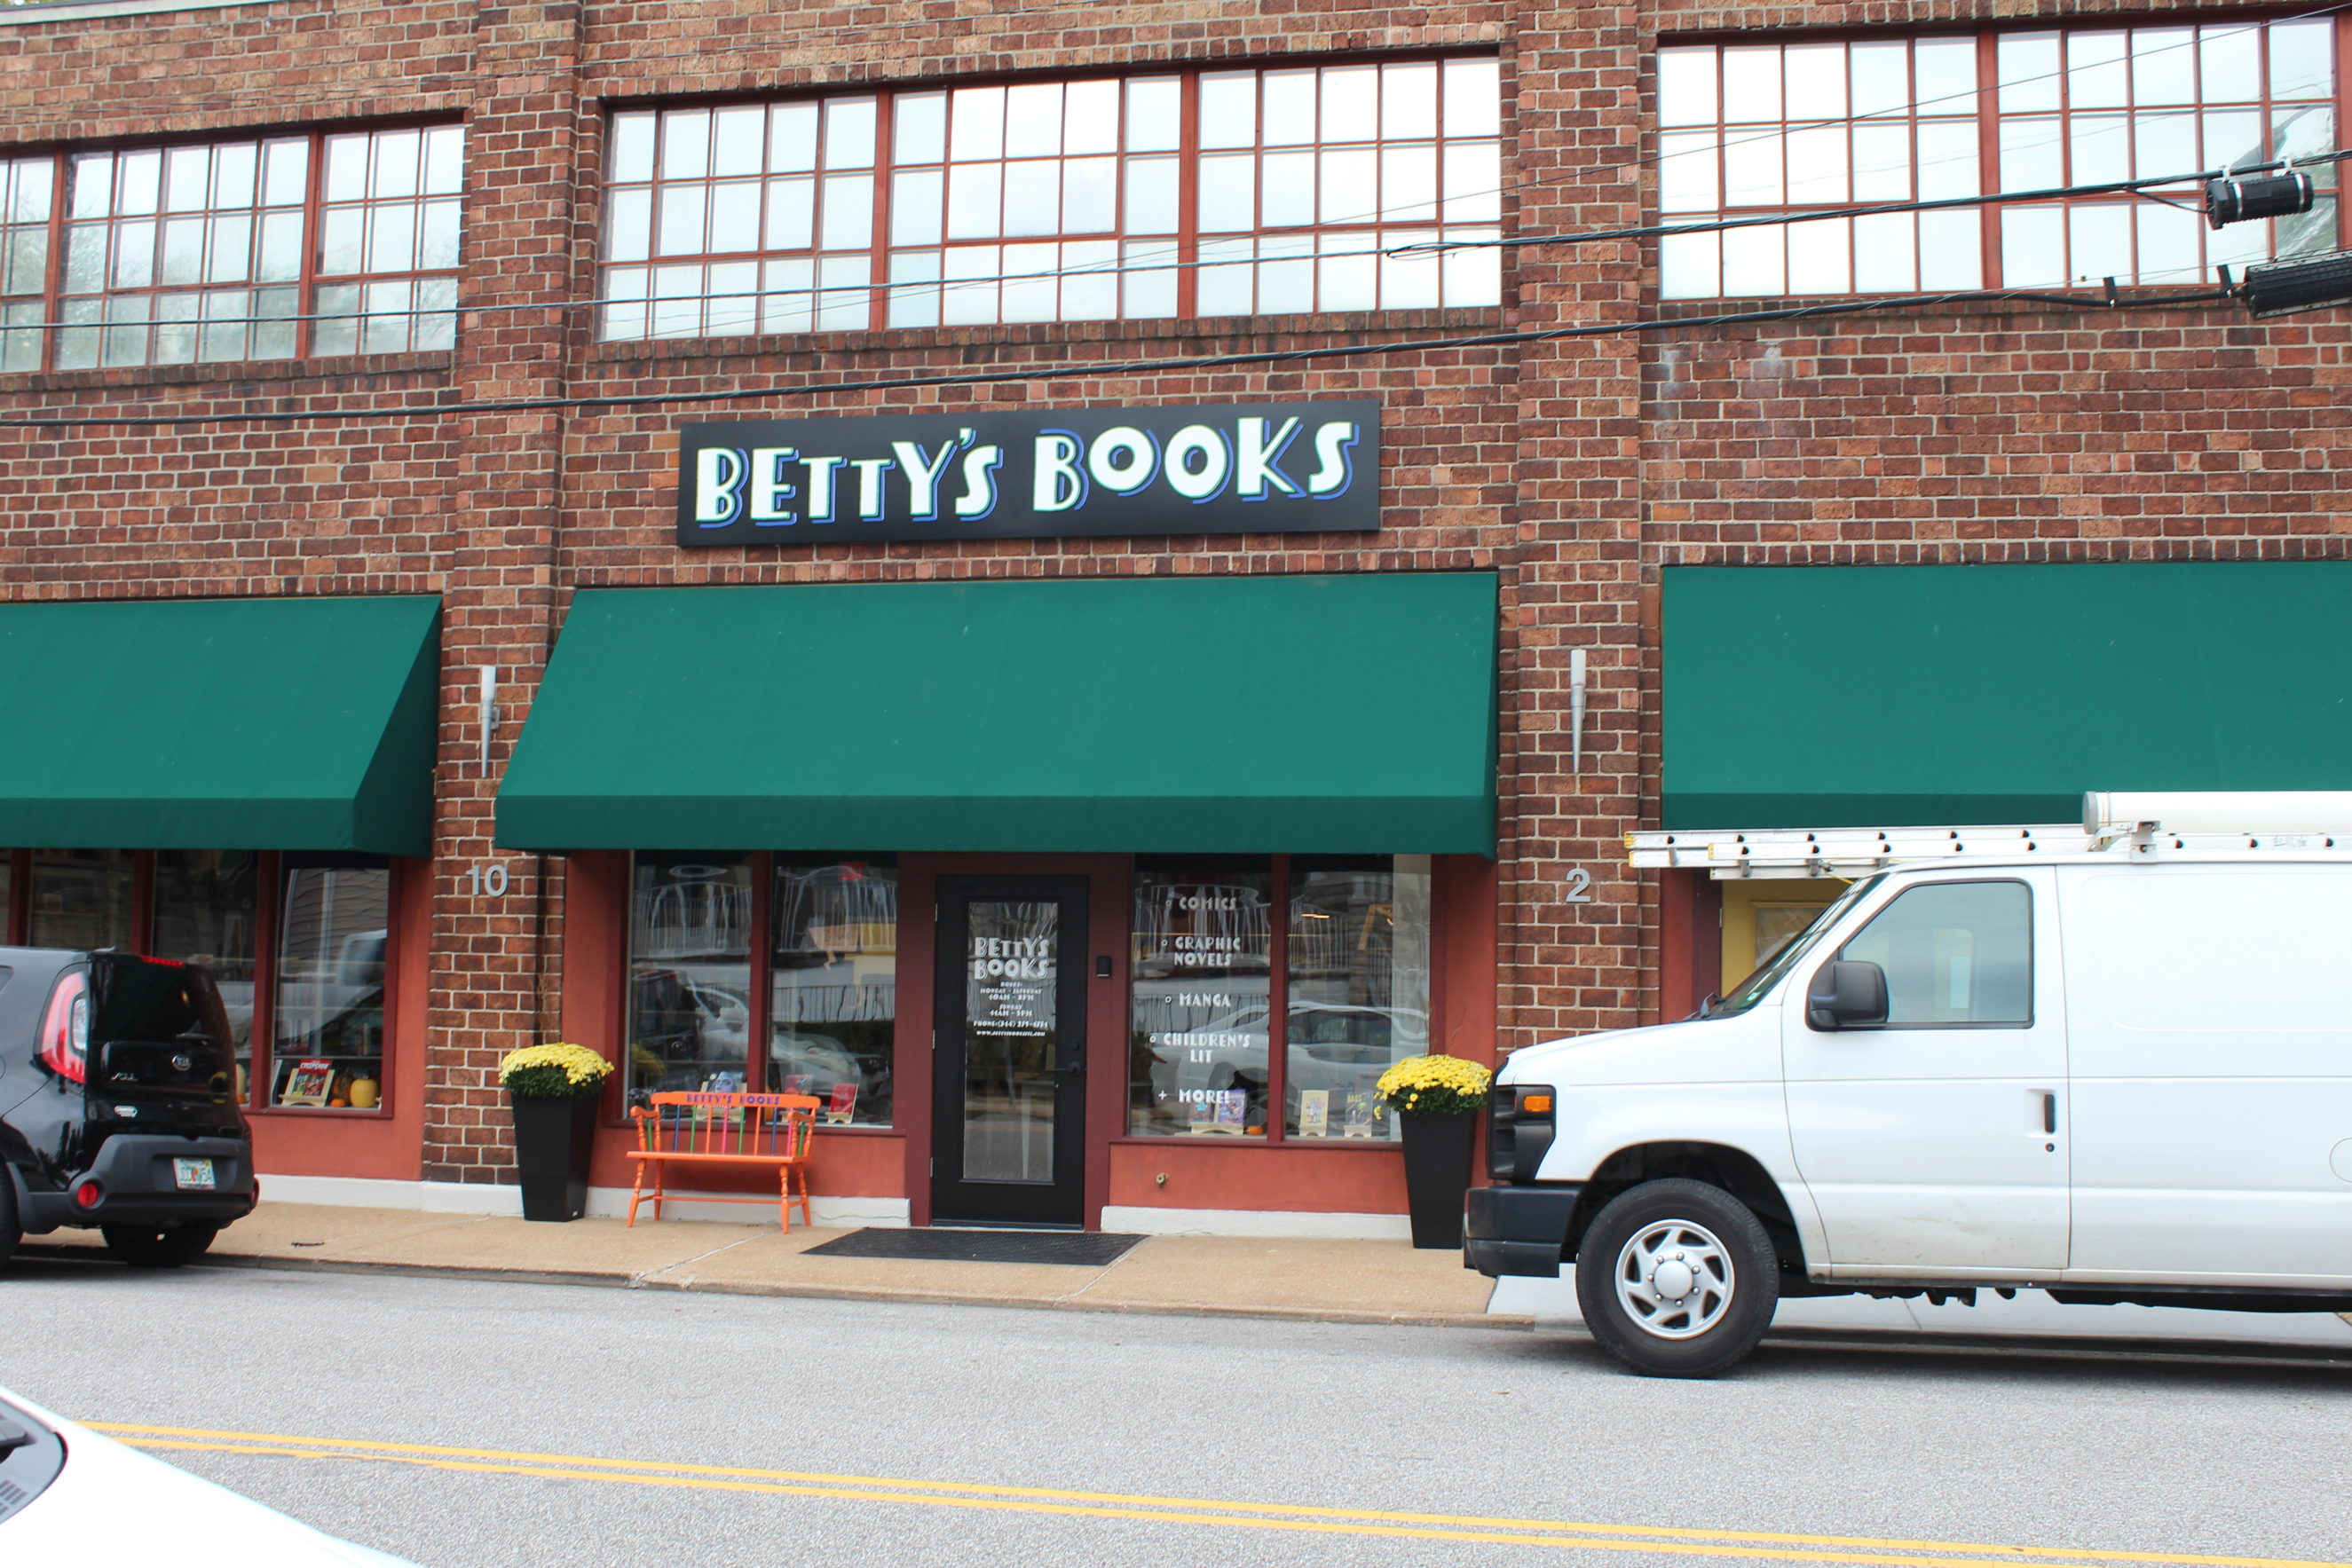 Betty's Books exterior front